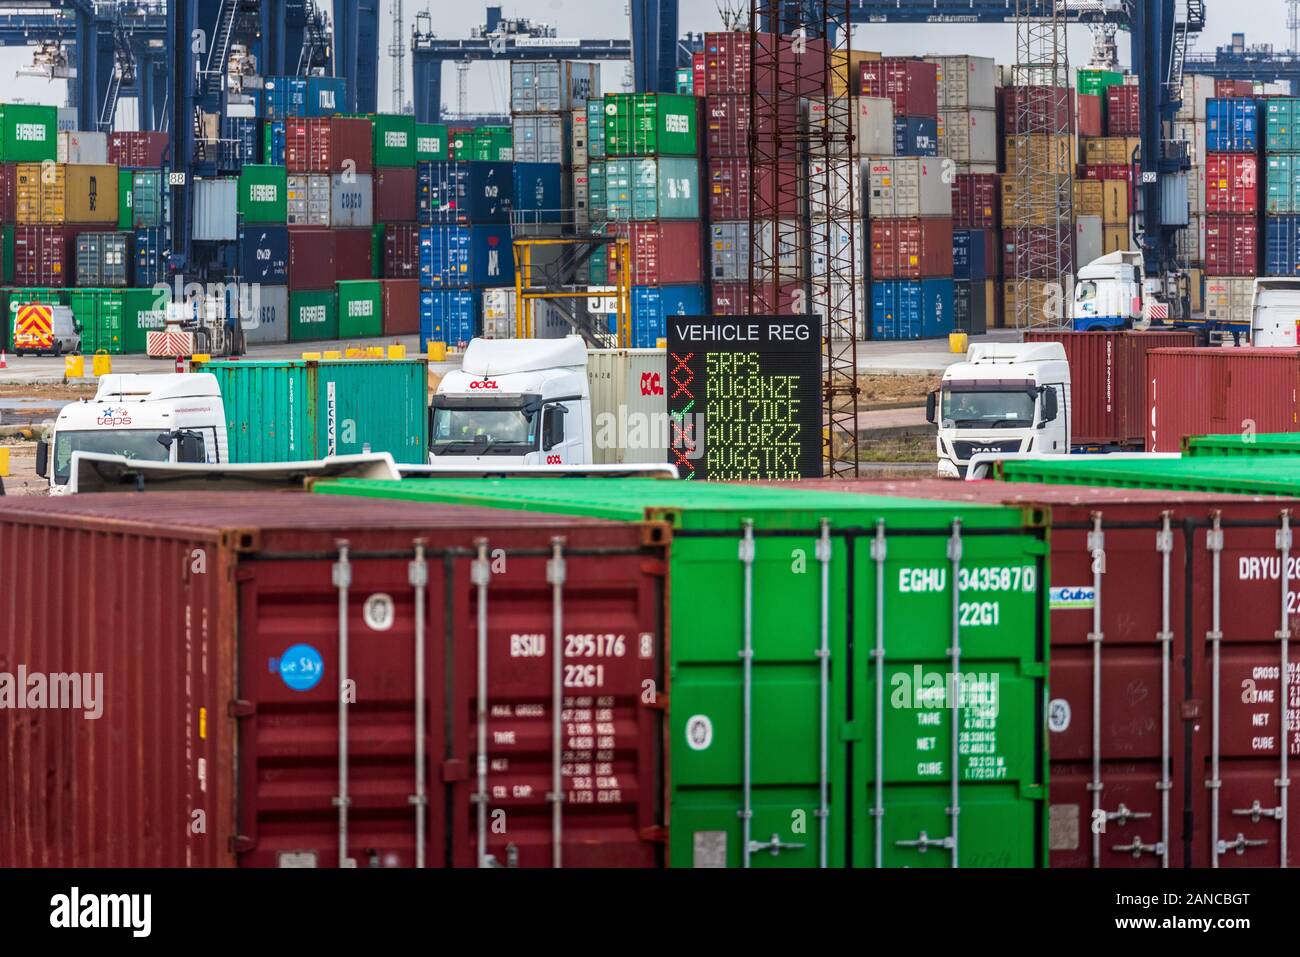 British Exports - Container trucks queue to drop off containers for export at Felixstowe Docks. Felixstowe Port is the UK's largest container port. Stock Photo